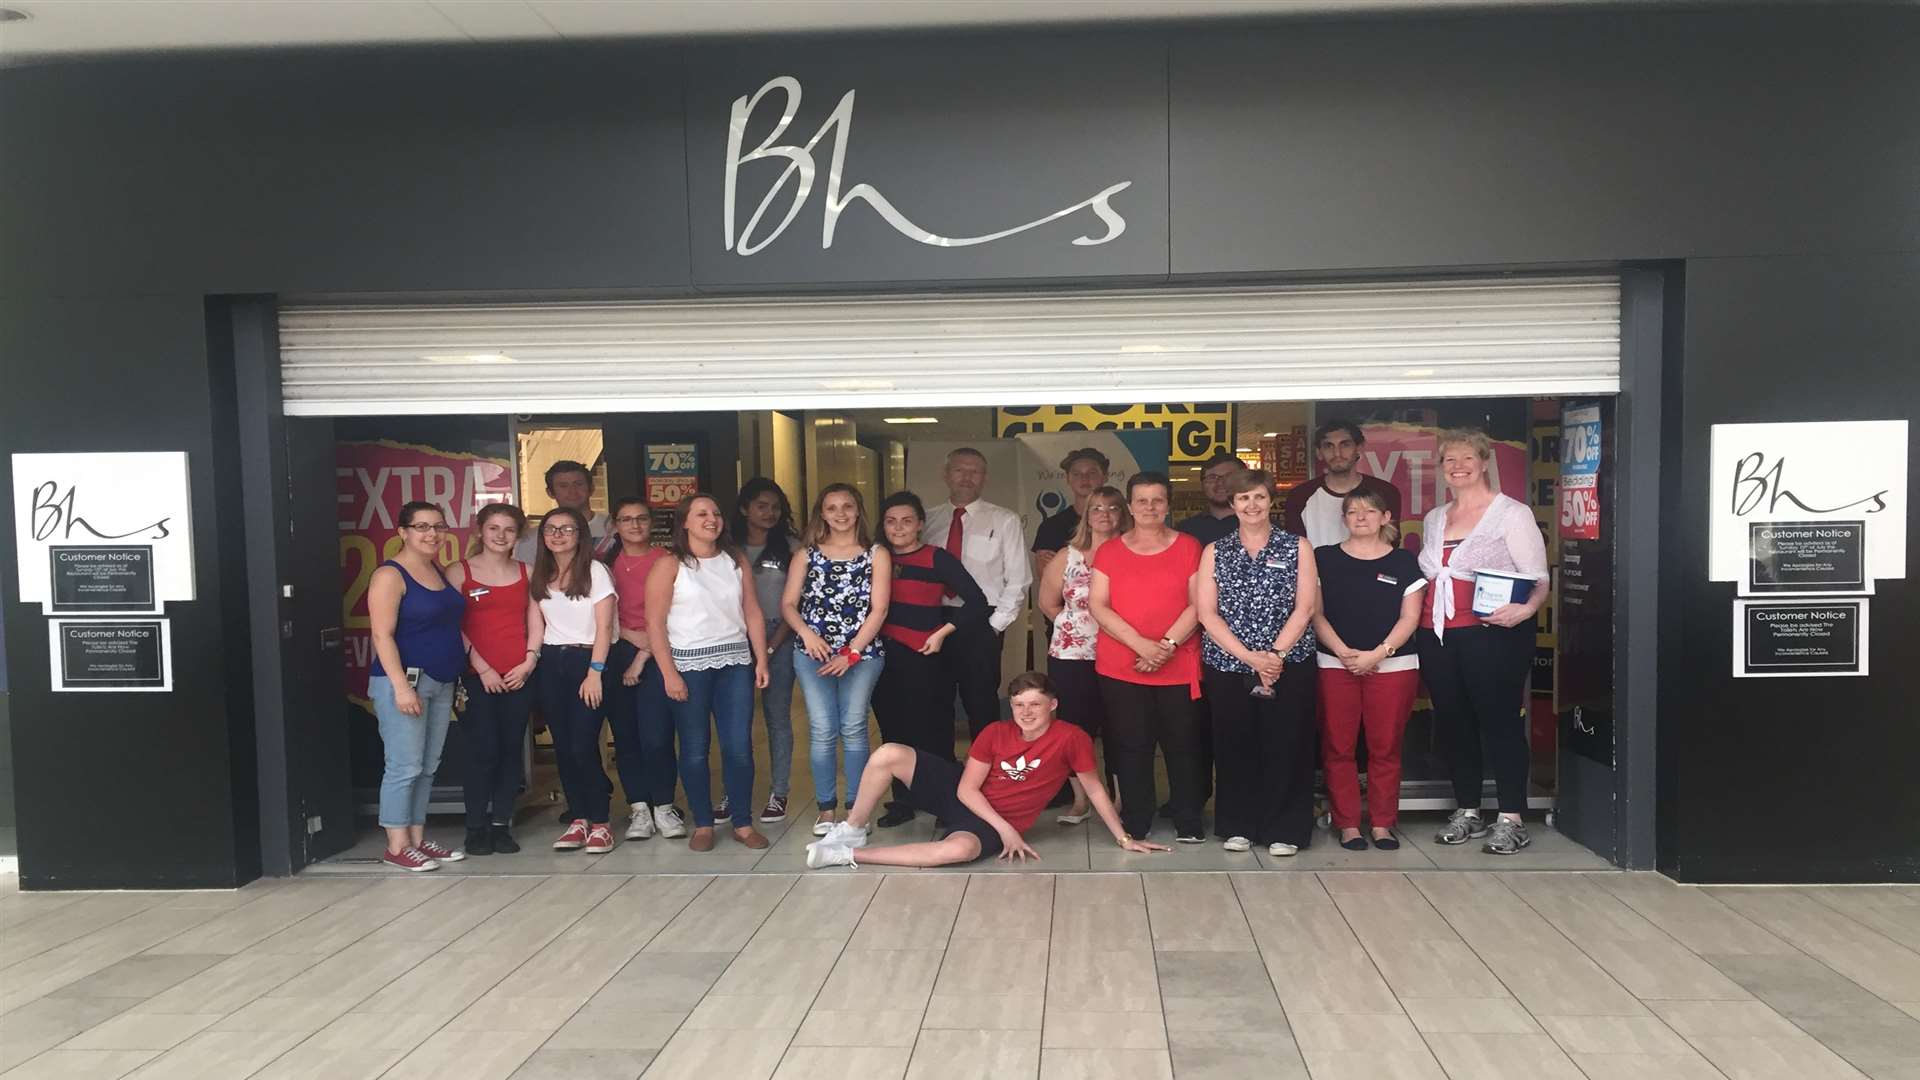 Staff said a final farewell to BHS in County Square